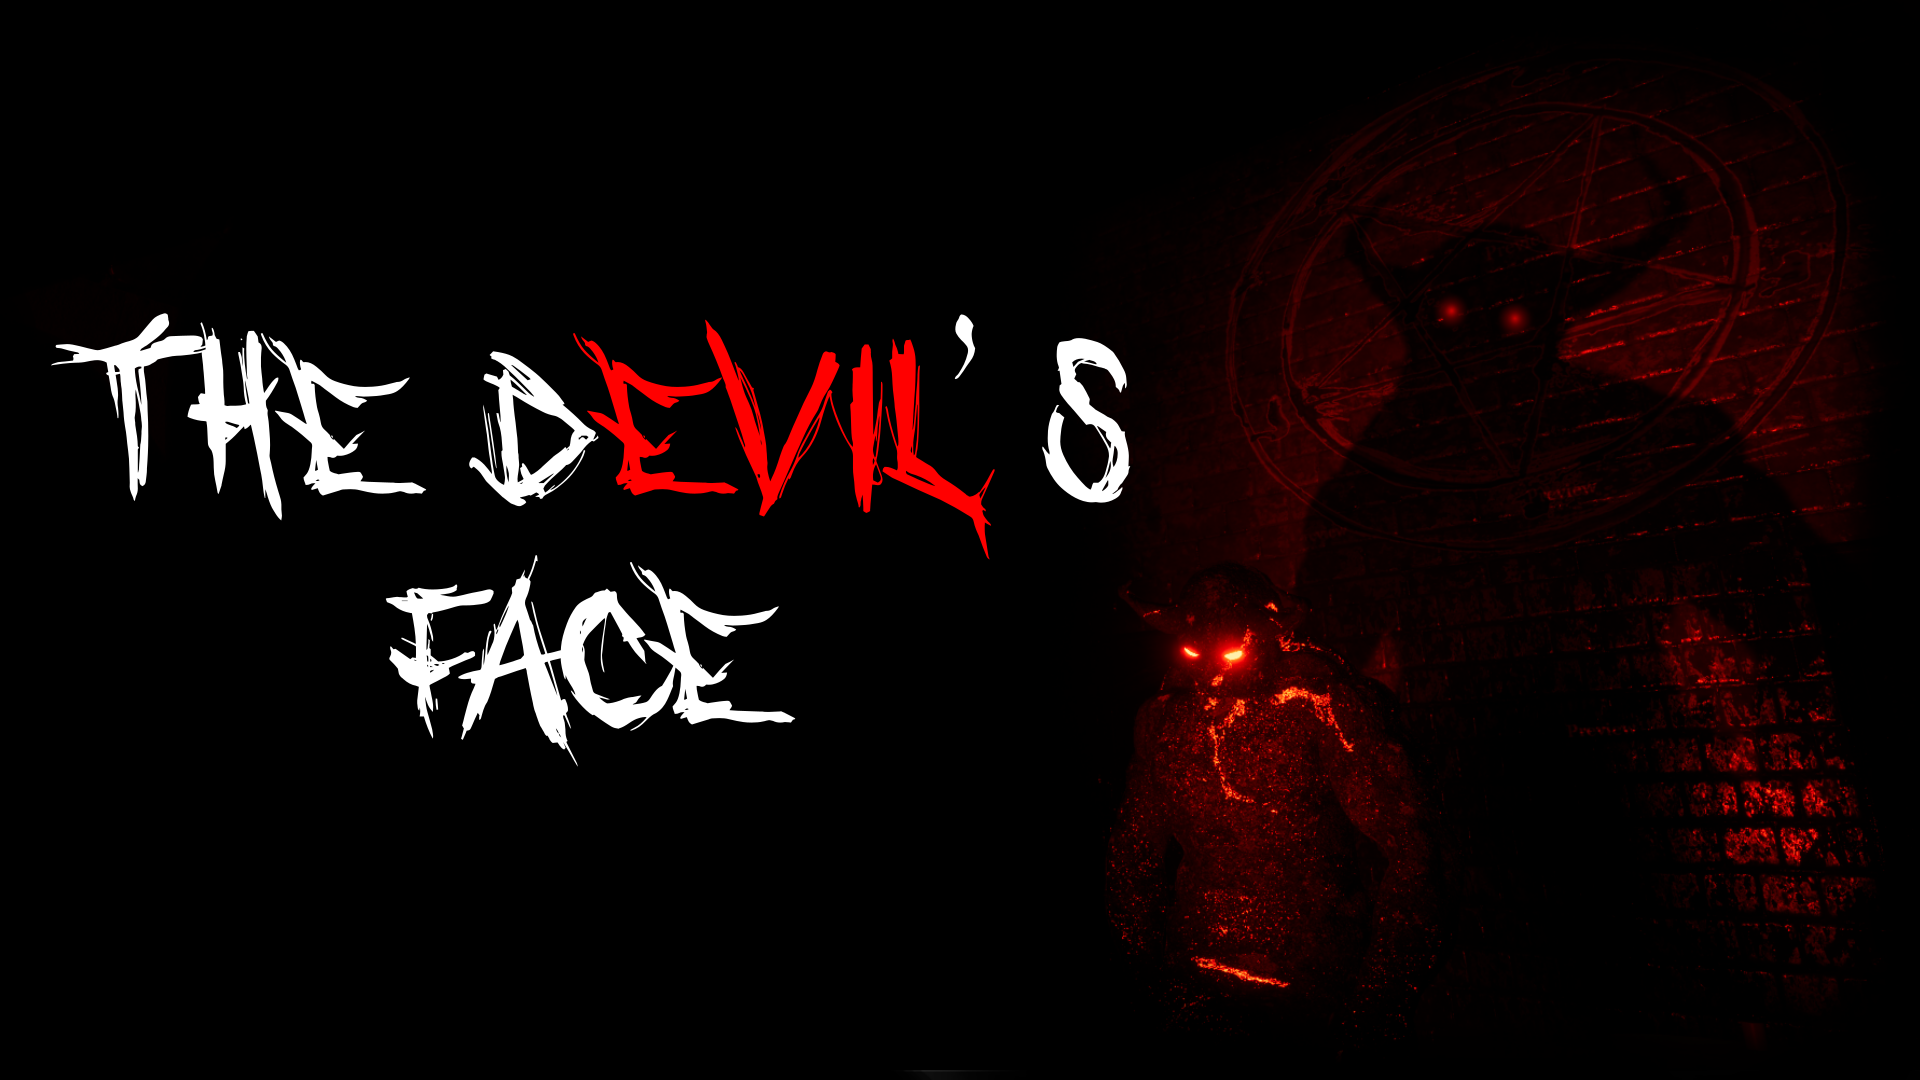 “The Devil’s Face” is now available on the Epic Games Store.